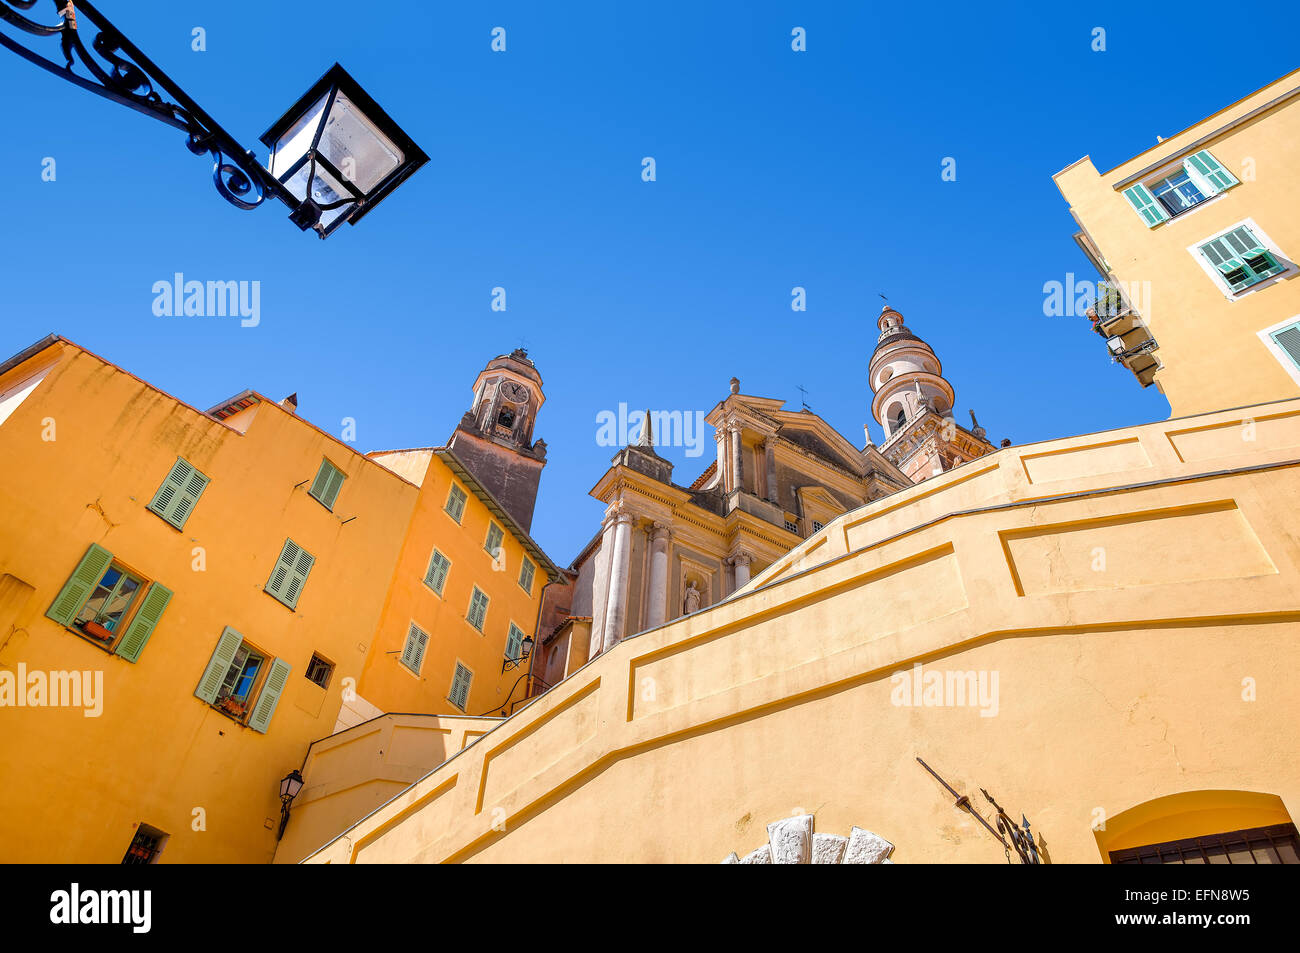 Yellow and orange residential houses and Saint Michel Archange basilica under clear blue sky in Menton, France. Stock Photo